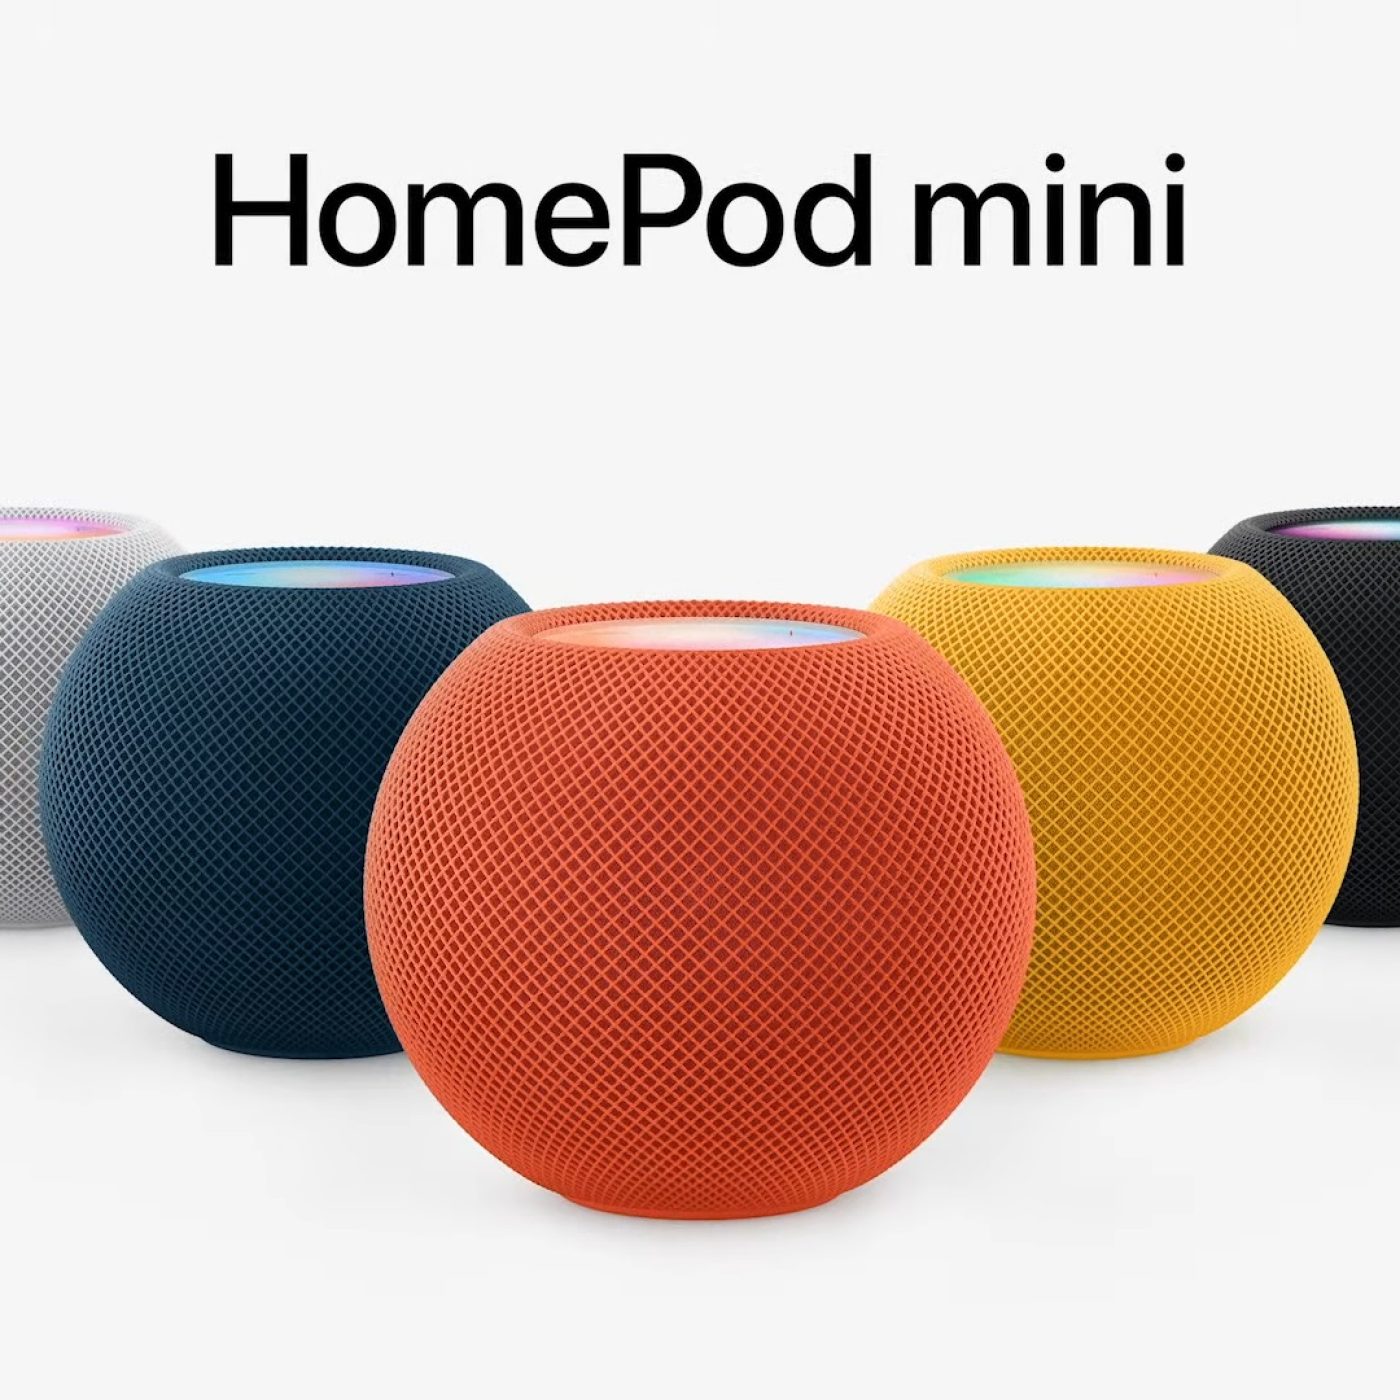 Apple introduces HomePod mini in new bold and expressive colors - Apple